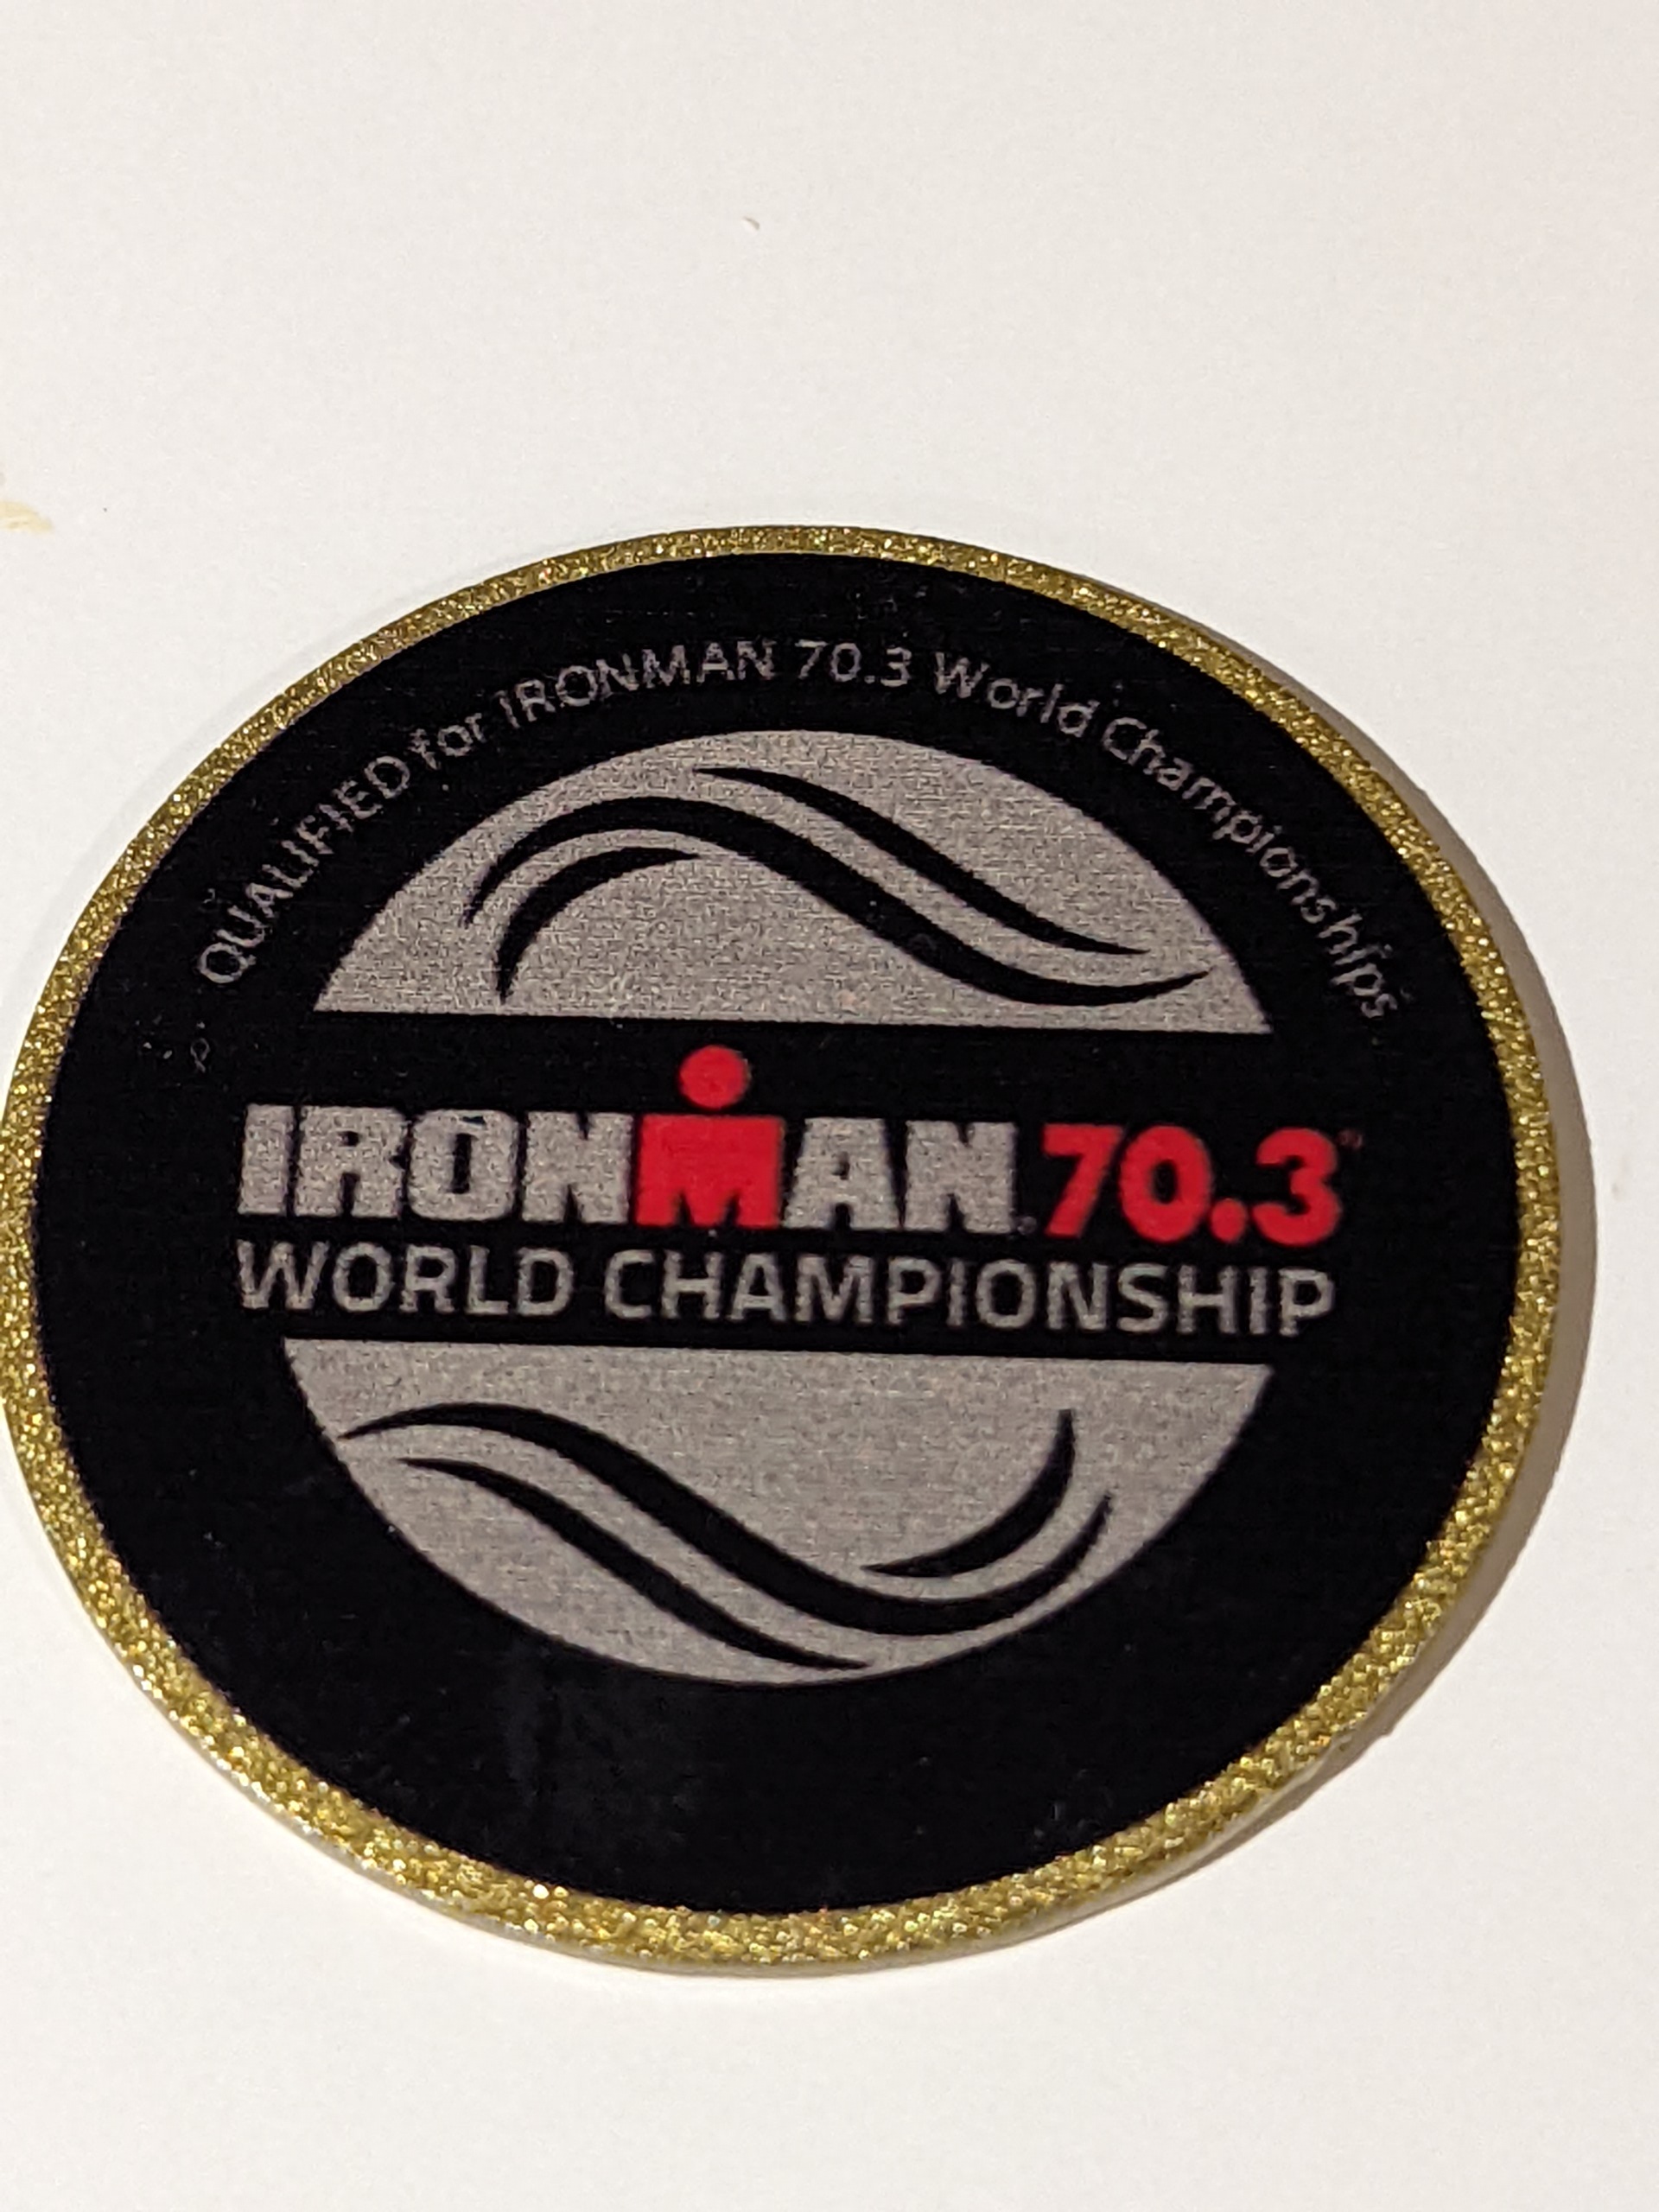 An unnecessarily long and personal recount of a 70.3 Ironman in Andorra